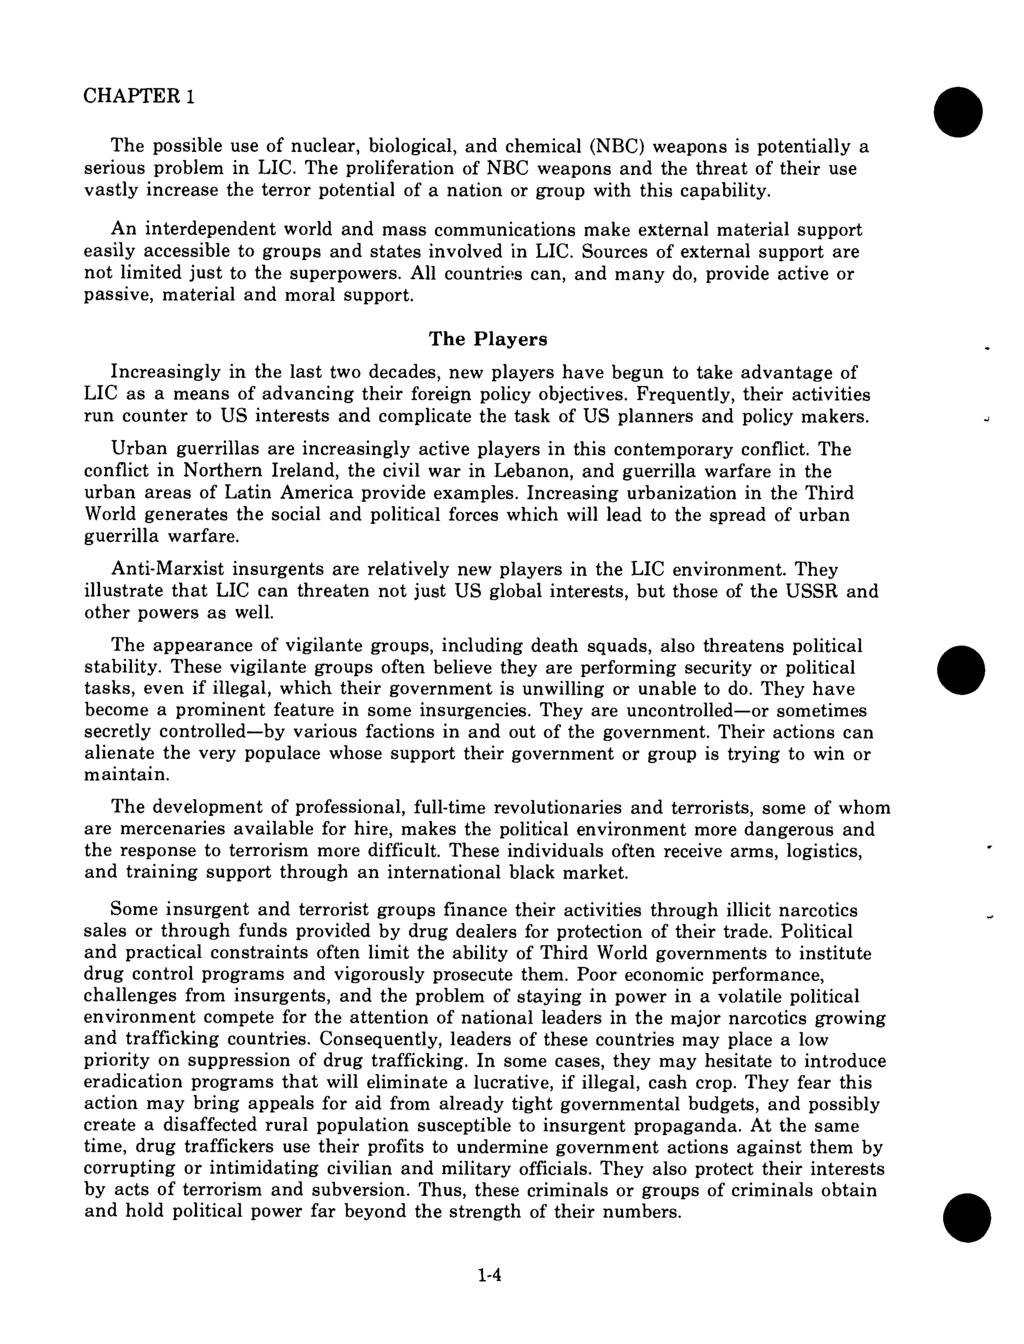 CHAPTER 1 The possible use of nuclear, biological, and chemical (NBC) weapons is potentially a serious problem in LIC.